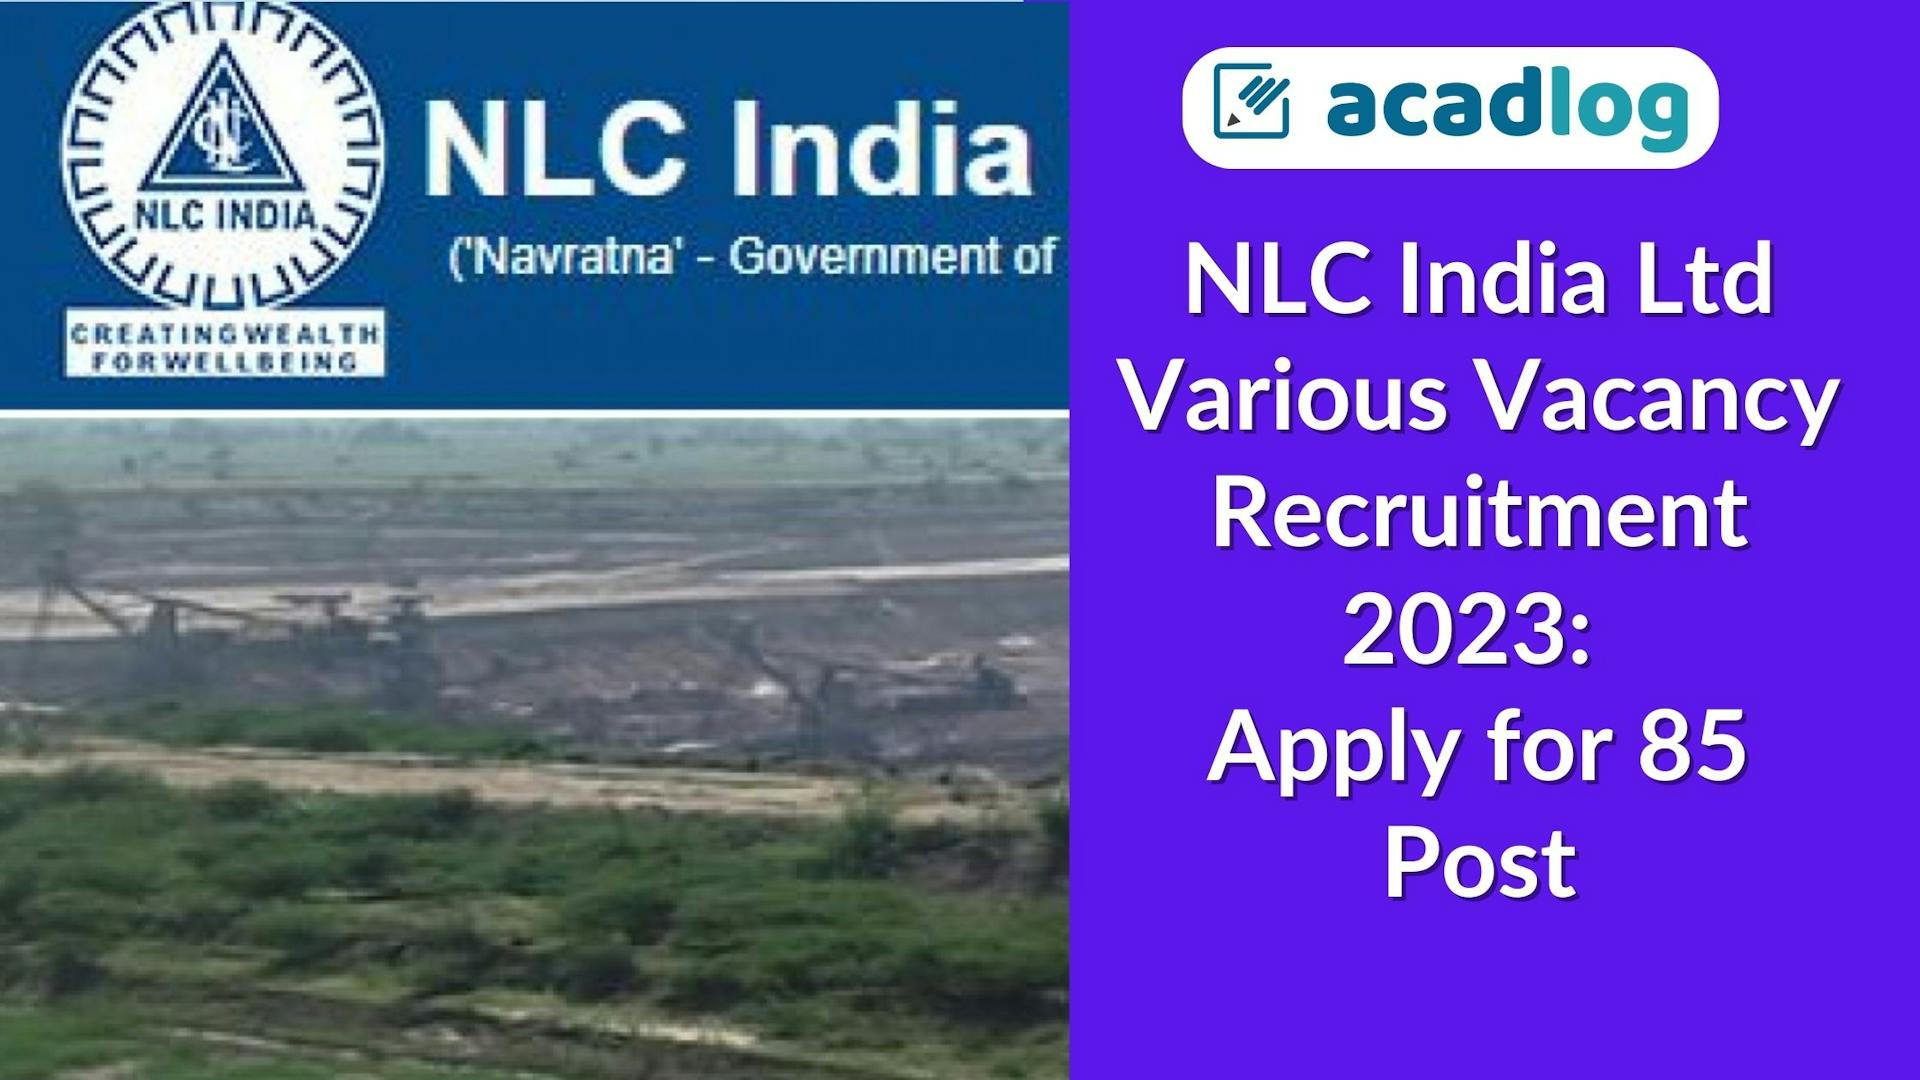 NLC India Ltd Various Vacancy Recruitment 2023: Apply for 85 Post